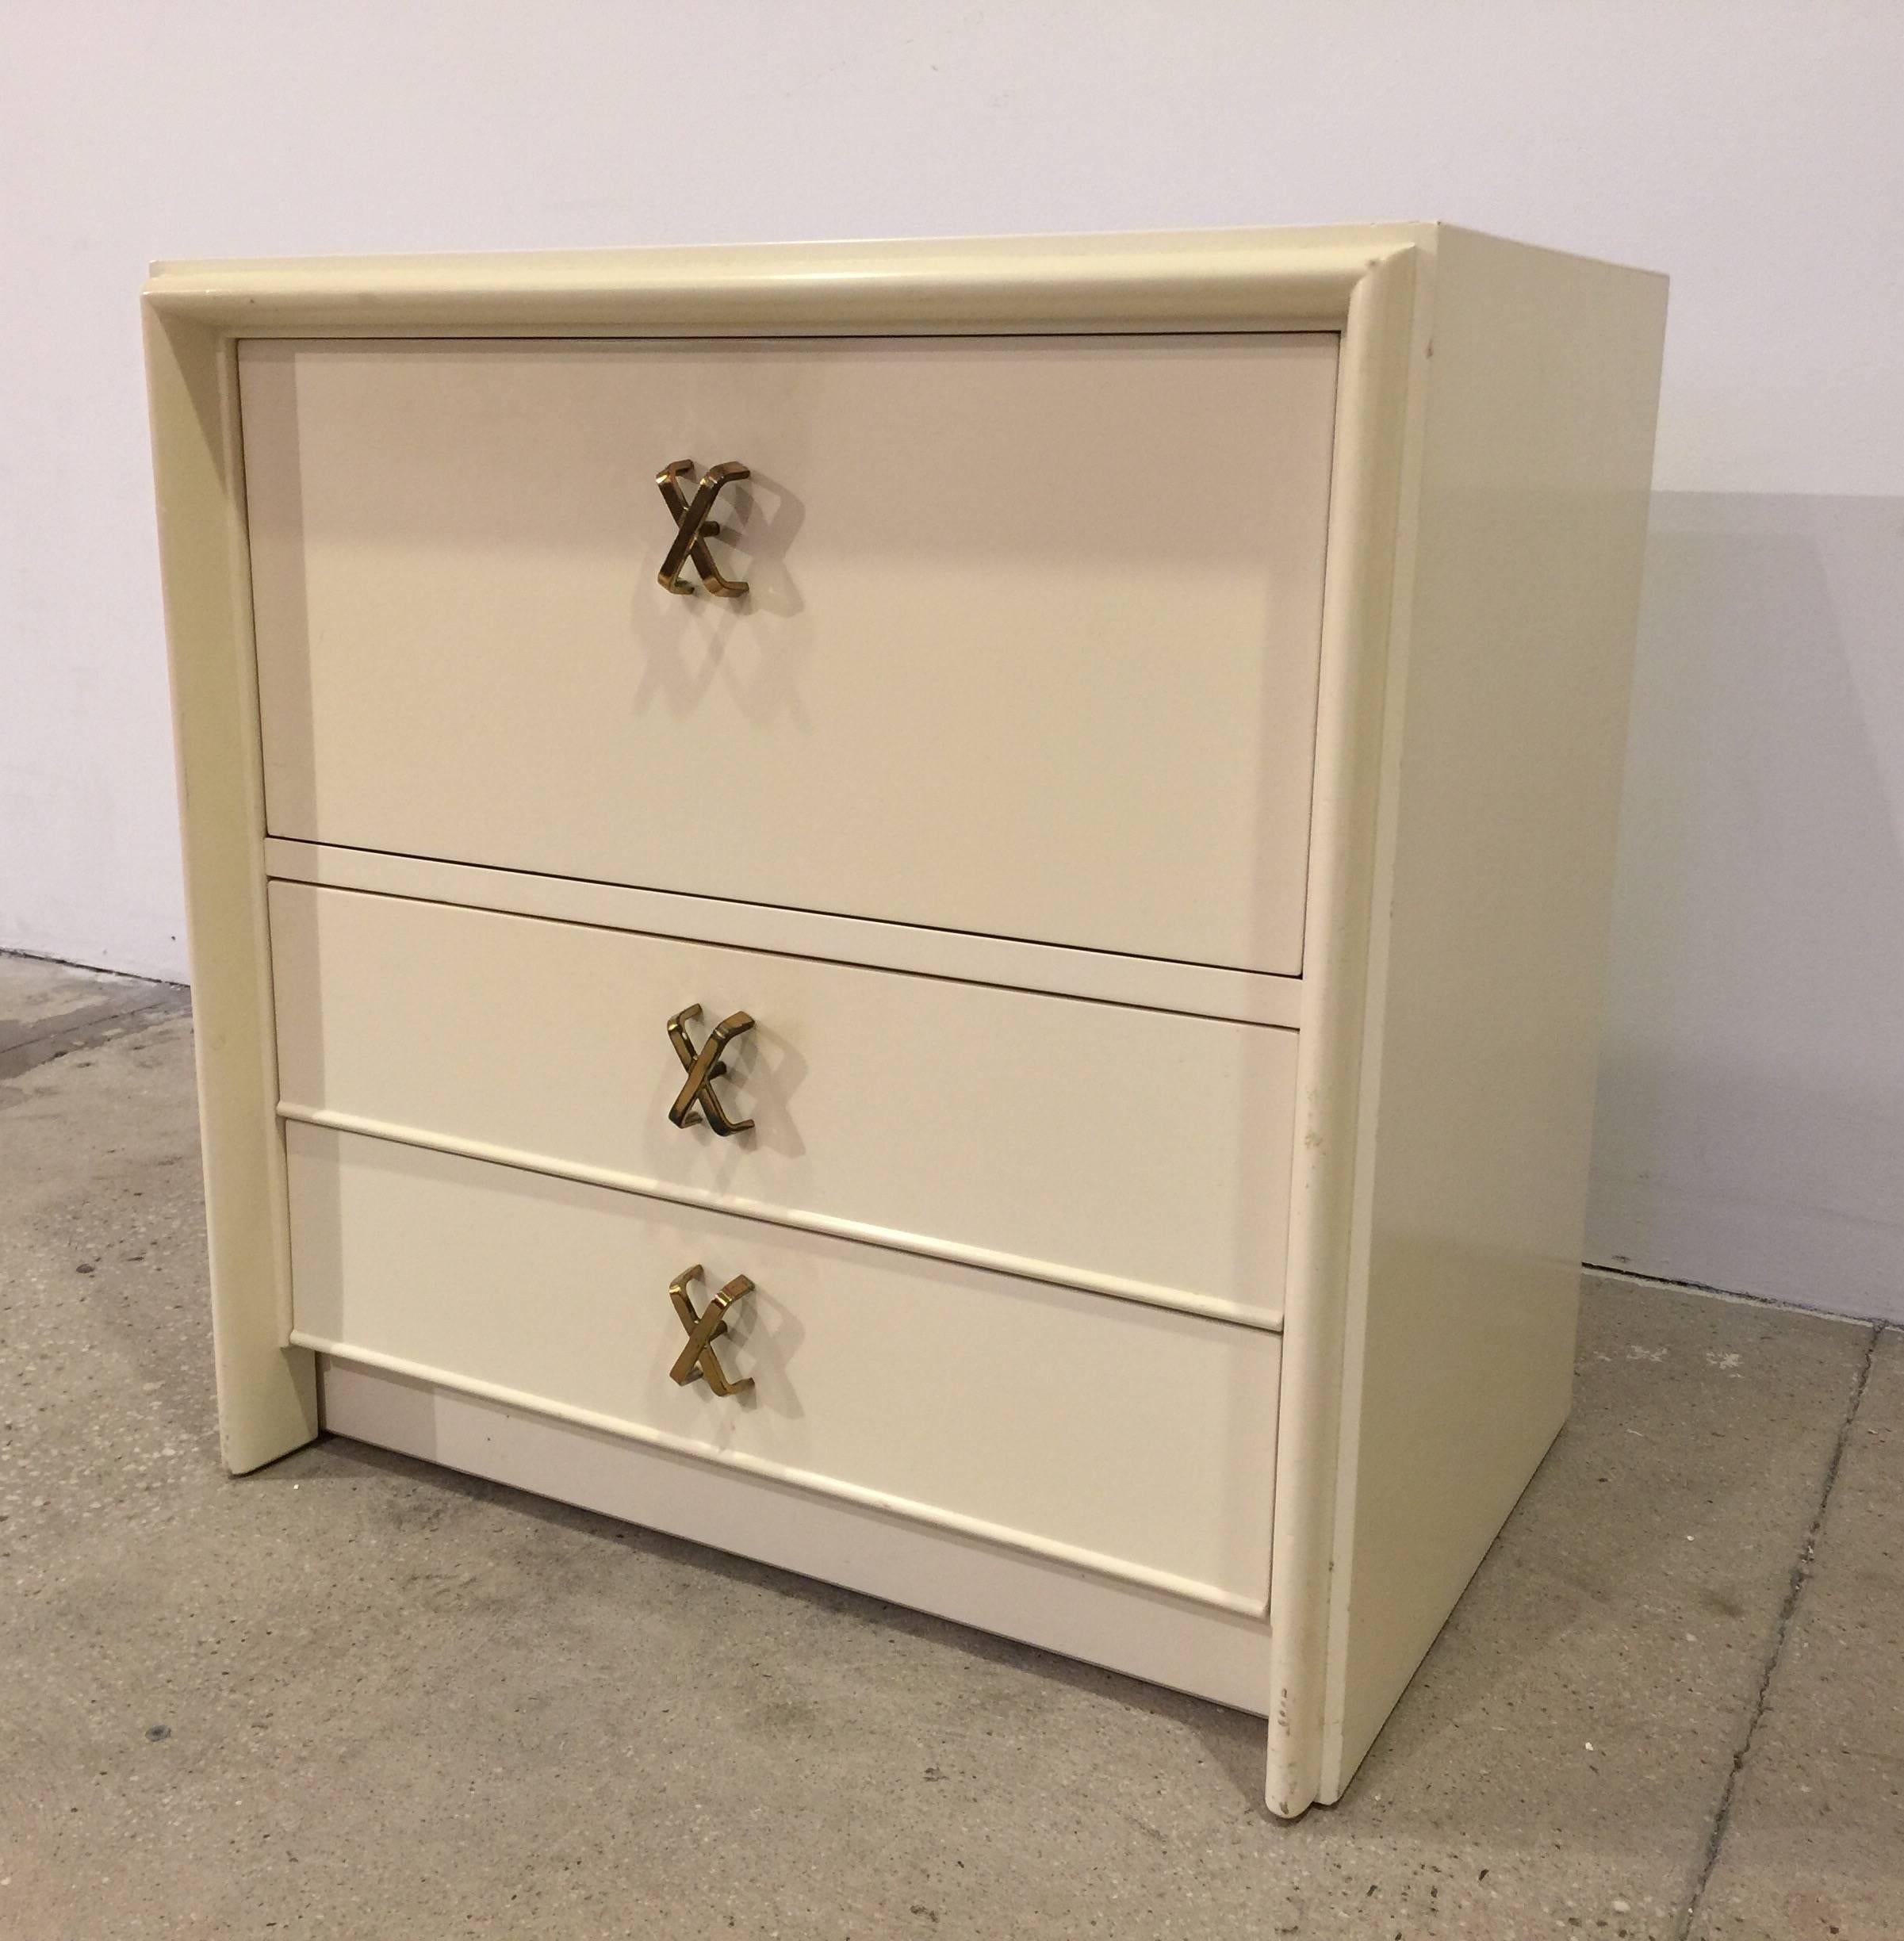 Pair of mahogany nightstands in white satin lacquer finish with polished brass 